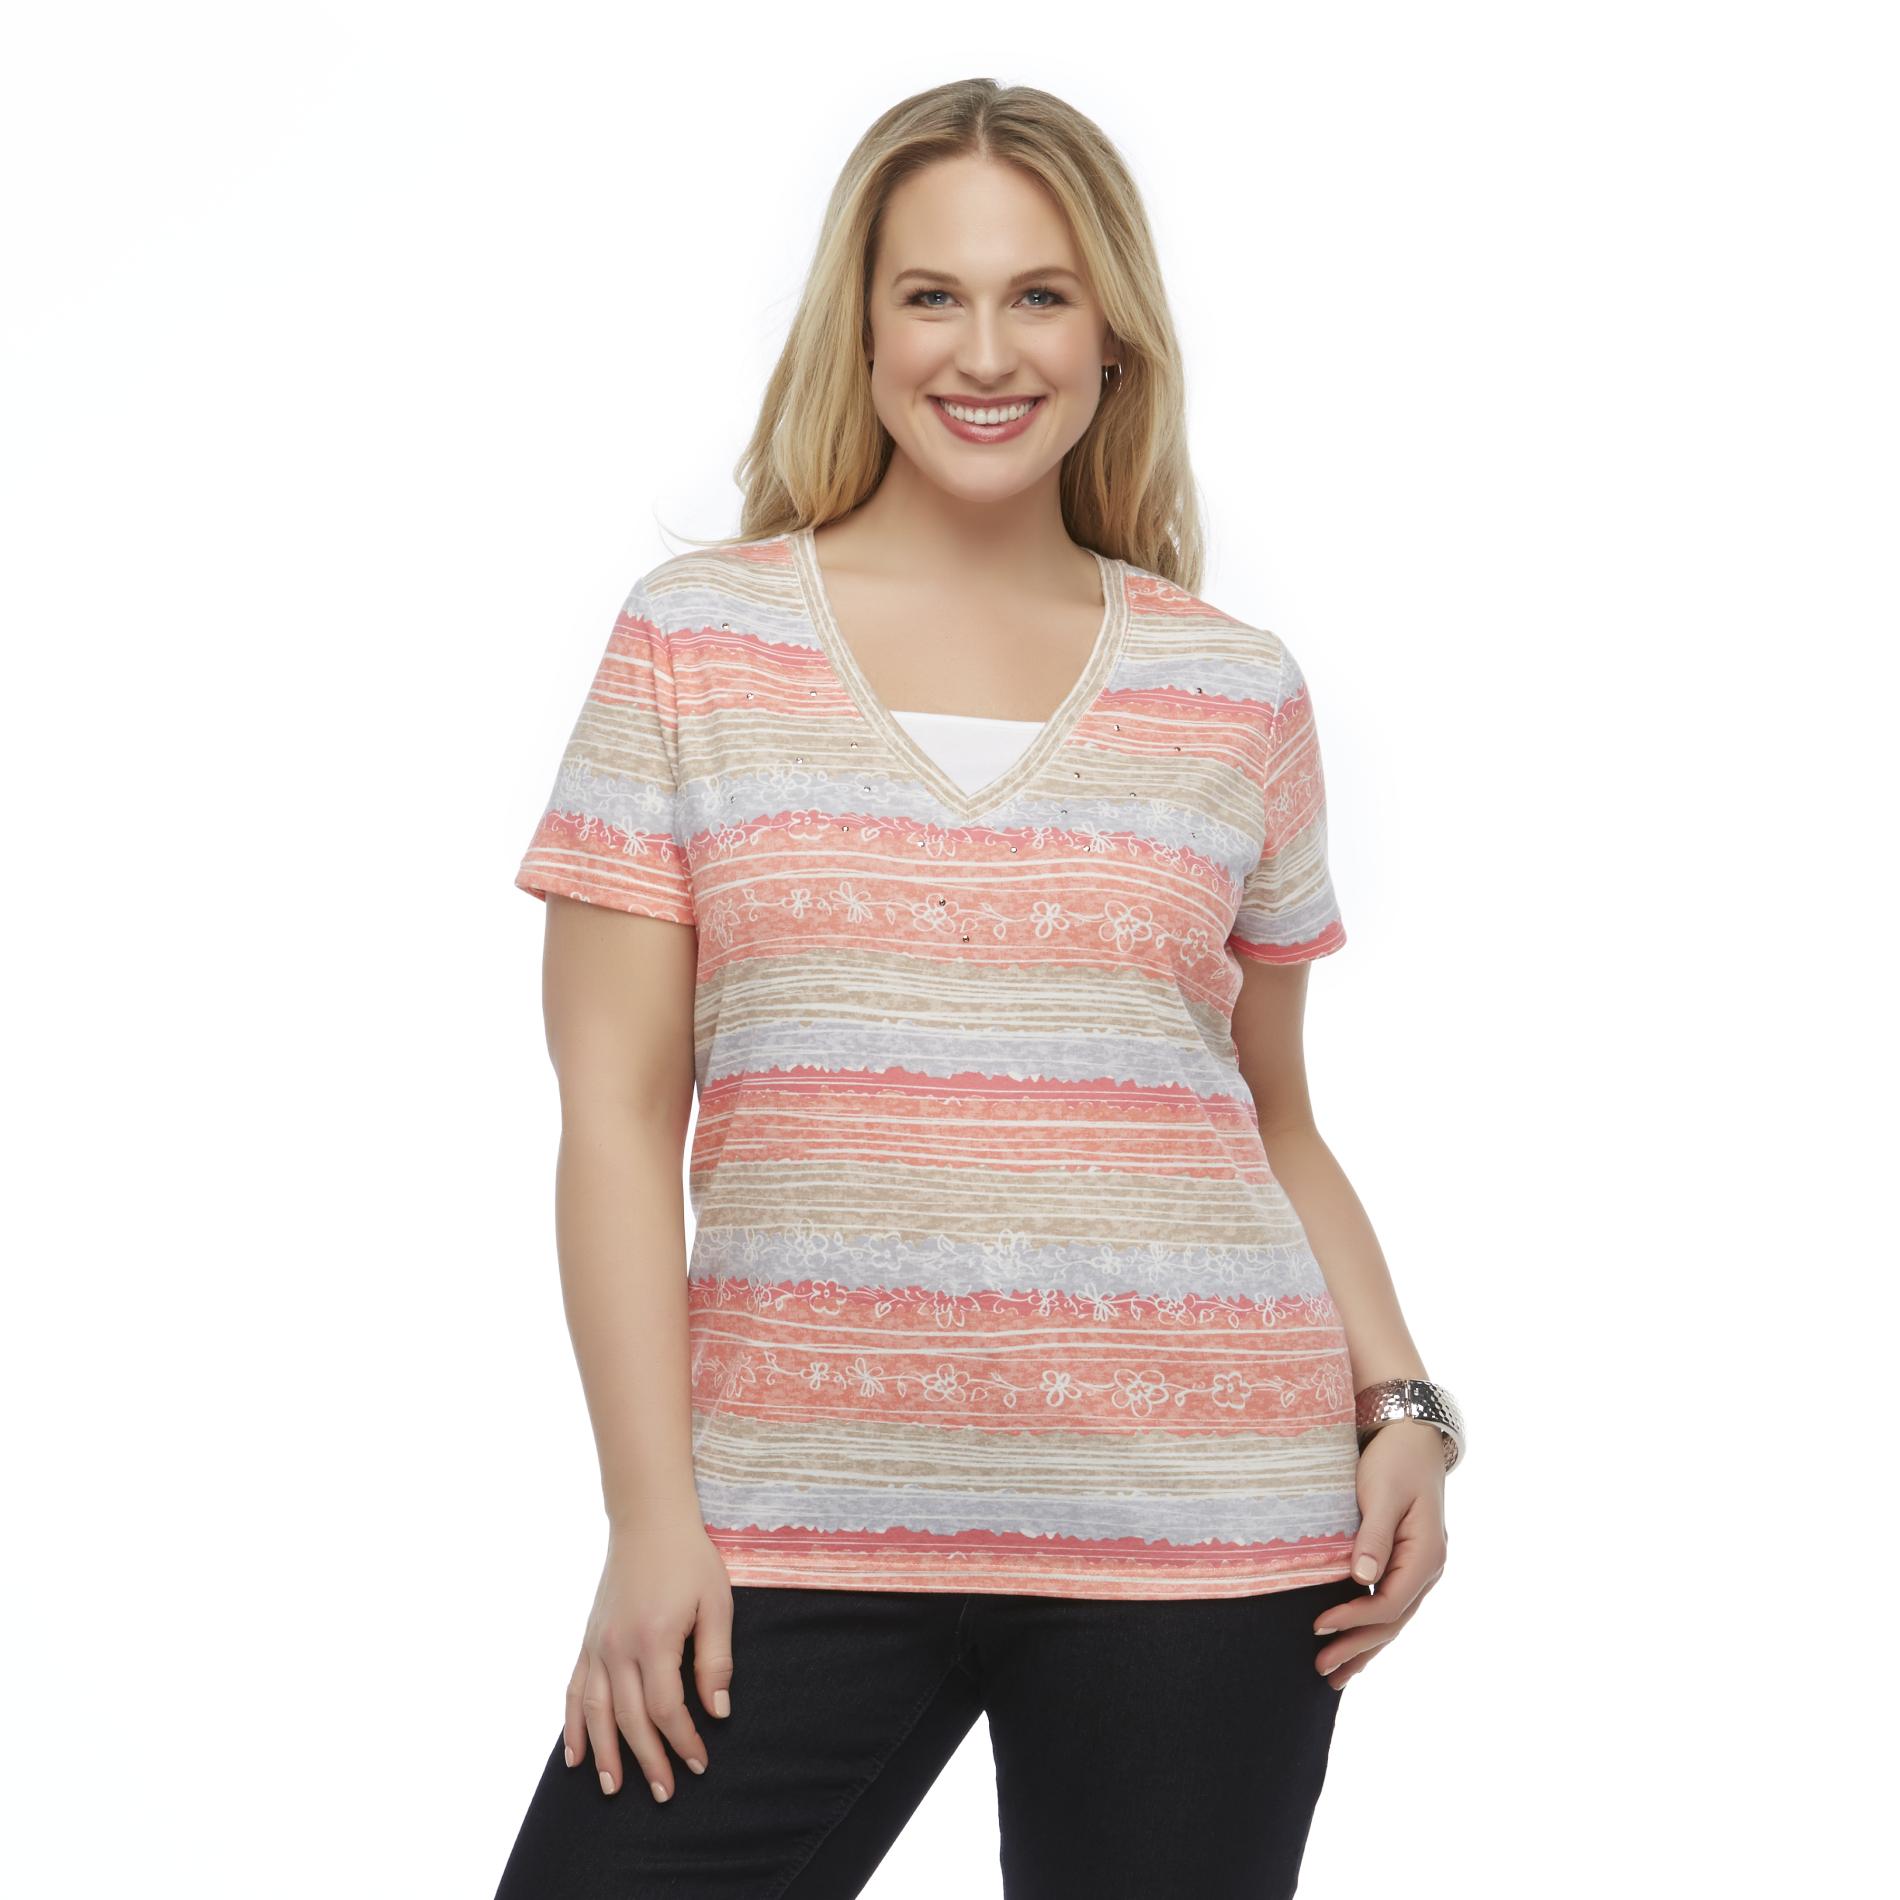 Basic Editions Women's Plus Layered-Look Embellished Top - Striped Floral